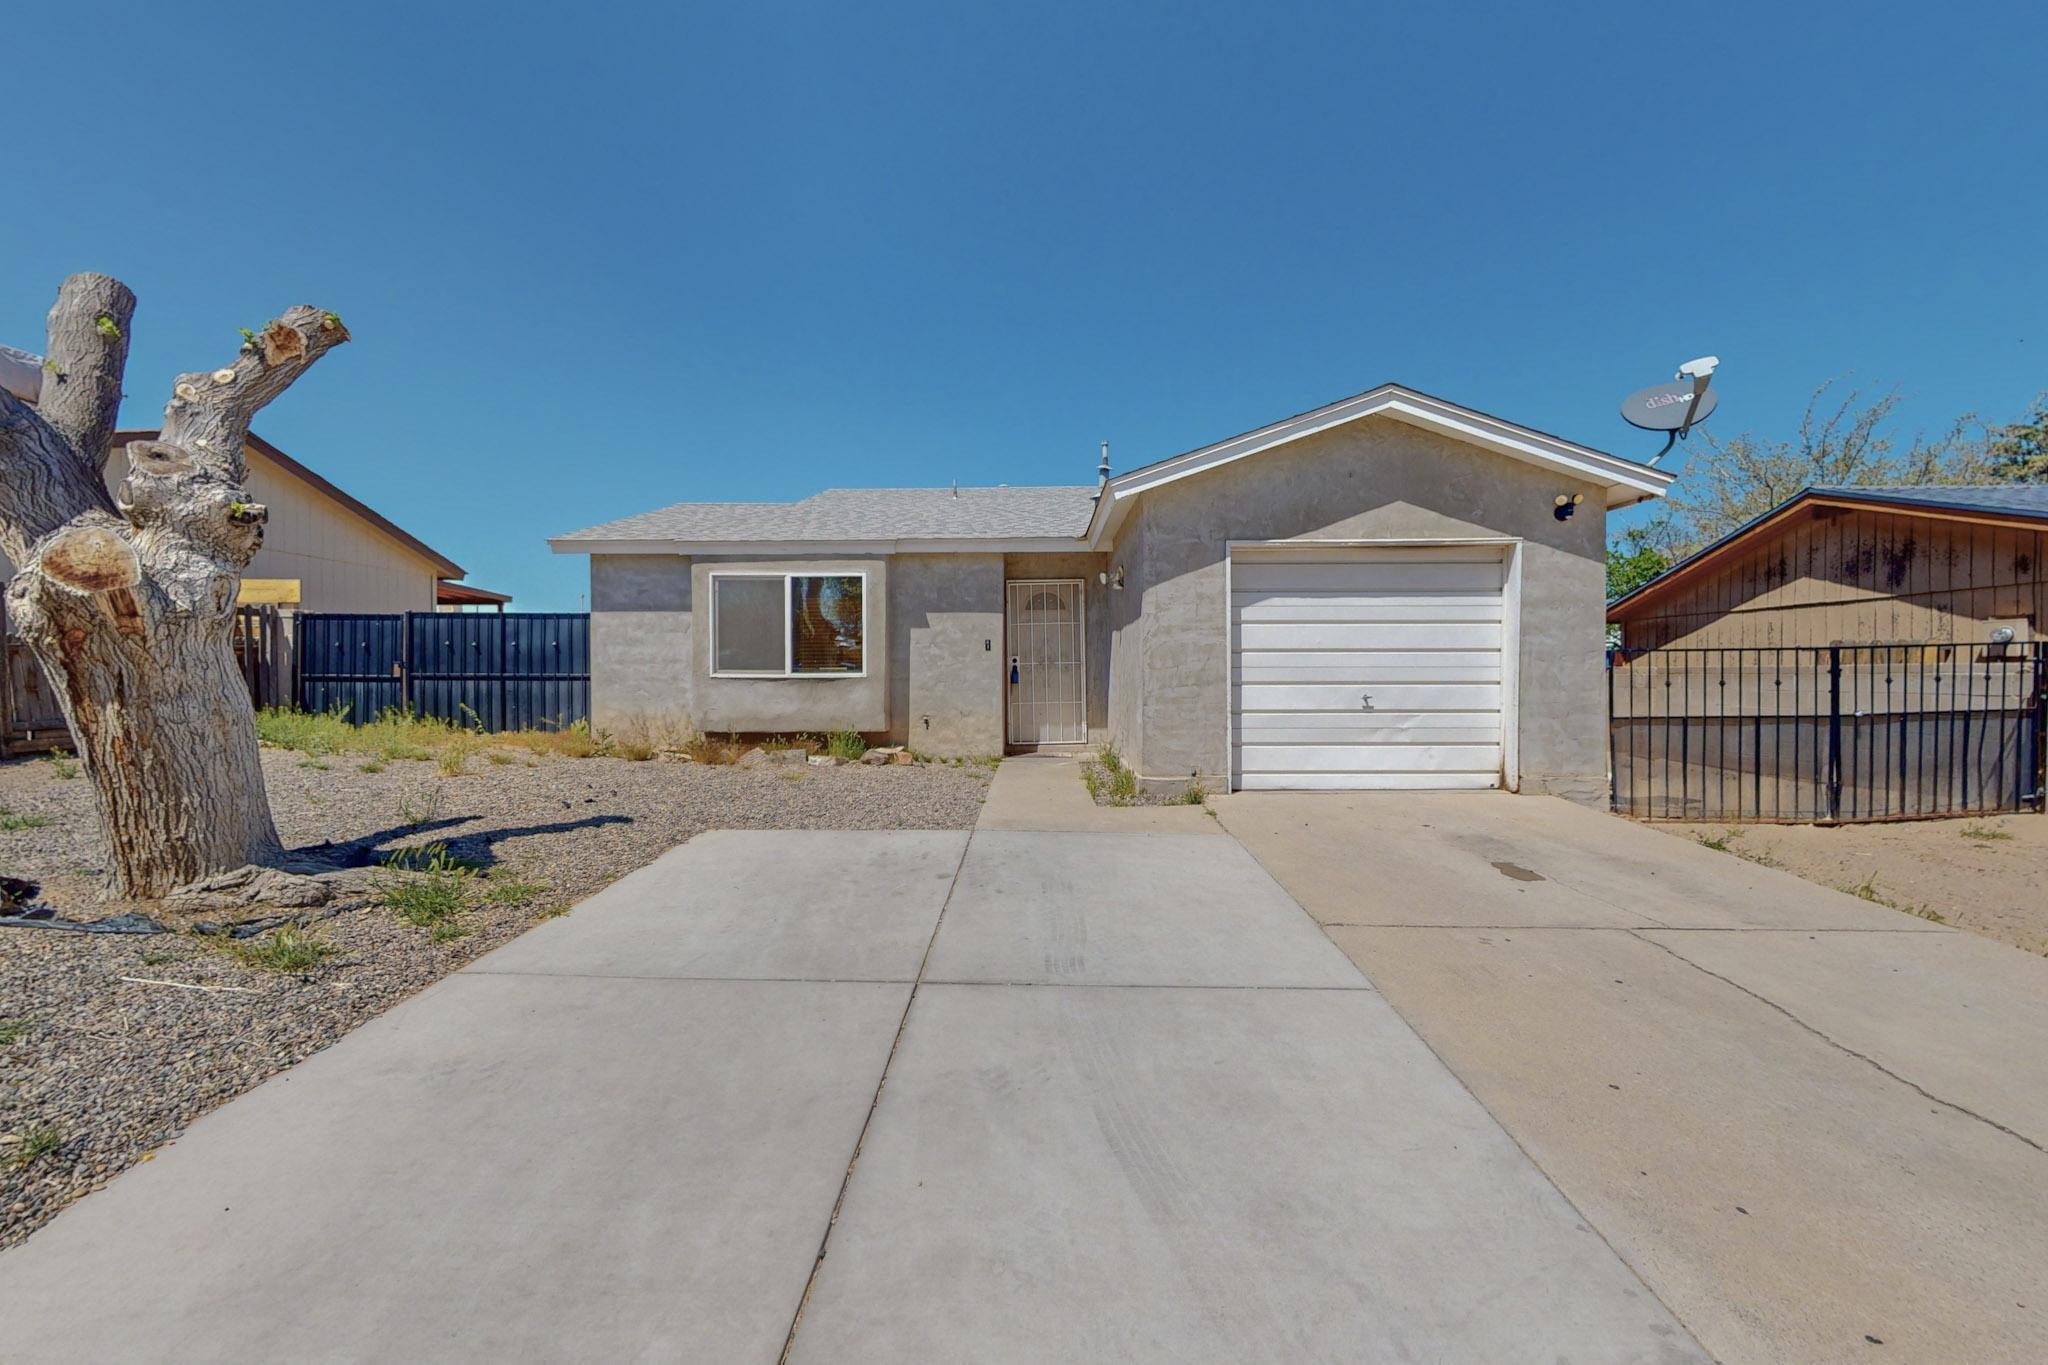 Great opportunity for home ownership! This home has backyard access and is close to shopping and schools.  Add your own personal touch to this beautiful opportunity. Being sold ''as is.''